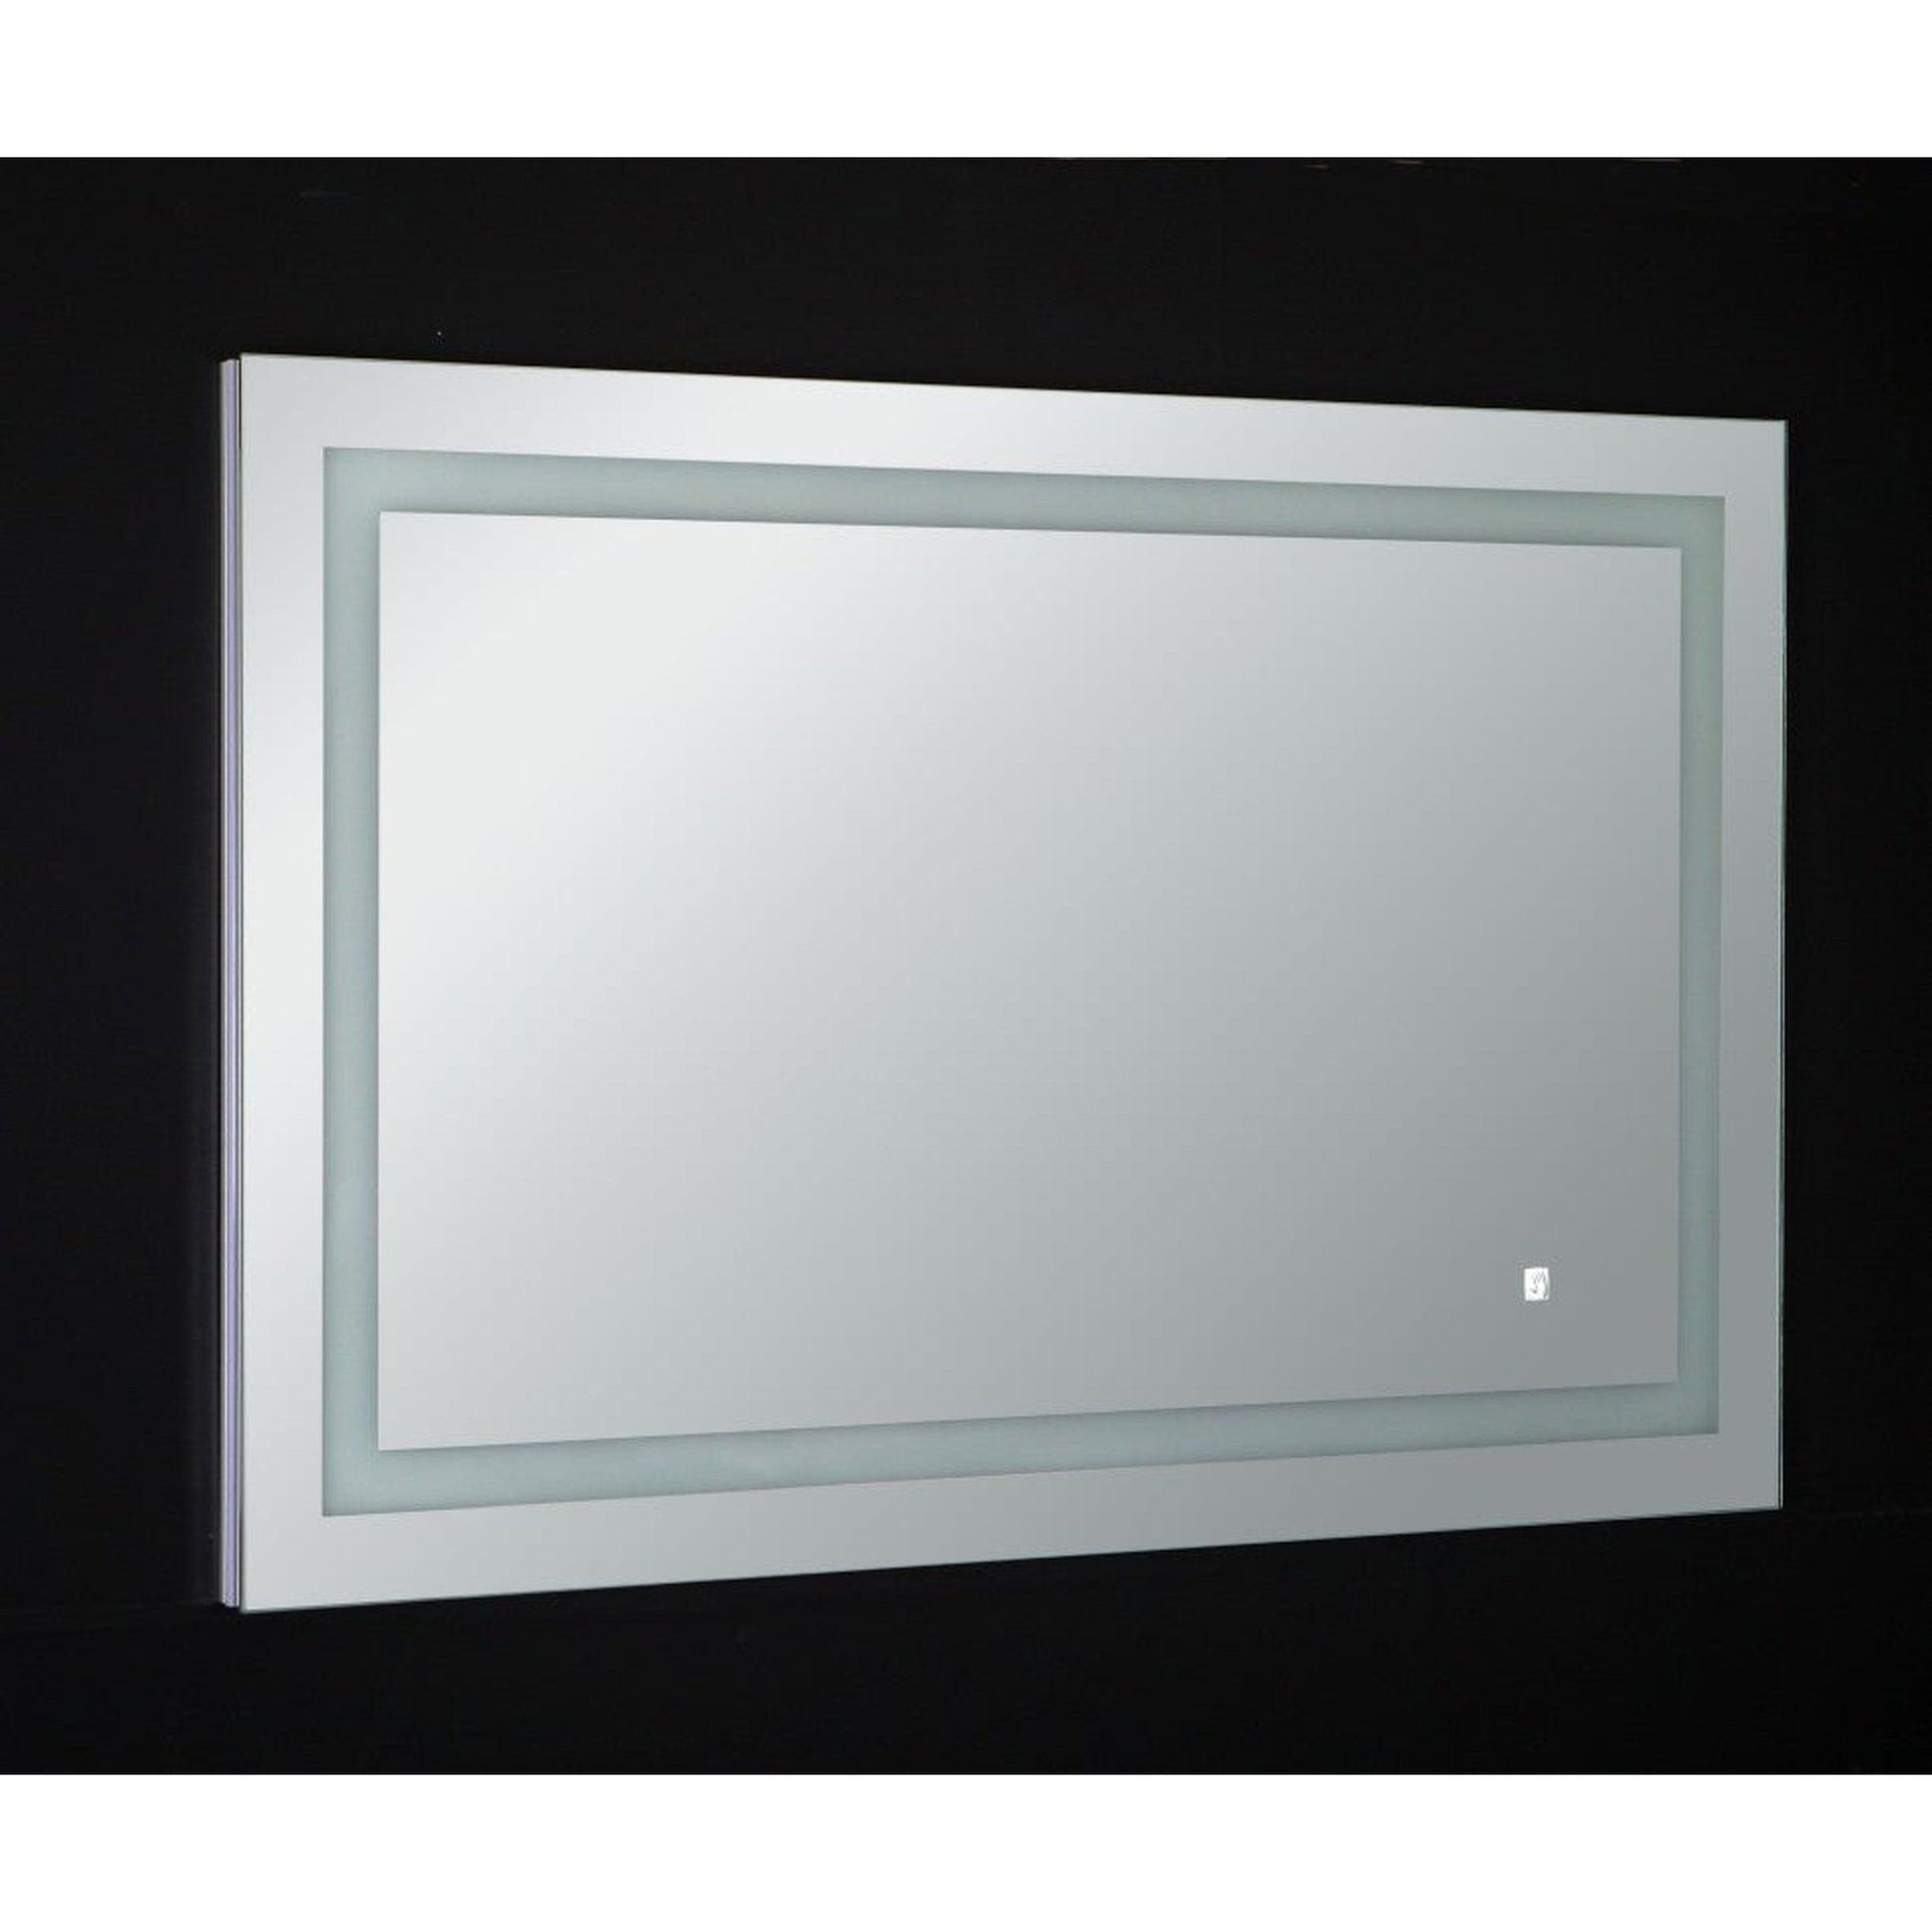 Eviva Deco Piece 31" x 24" Wall Mounted Bathroom Vanity Mirror with Backlit LED and Frame Lights